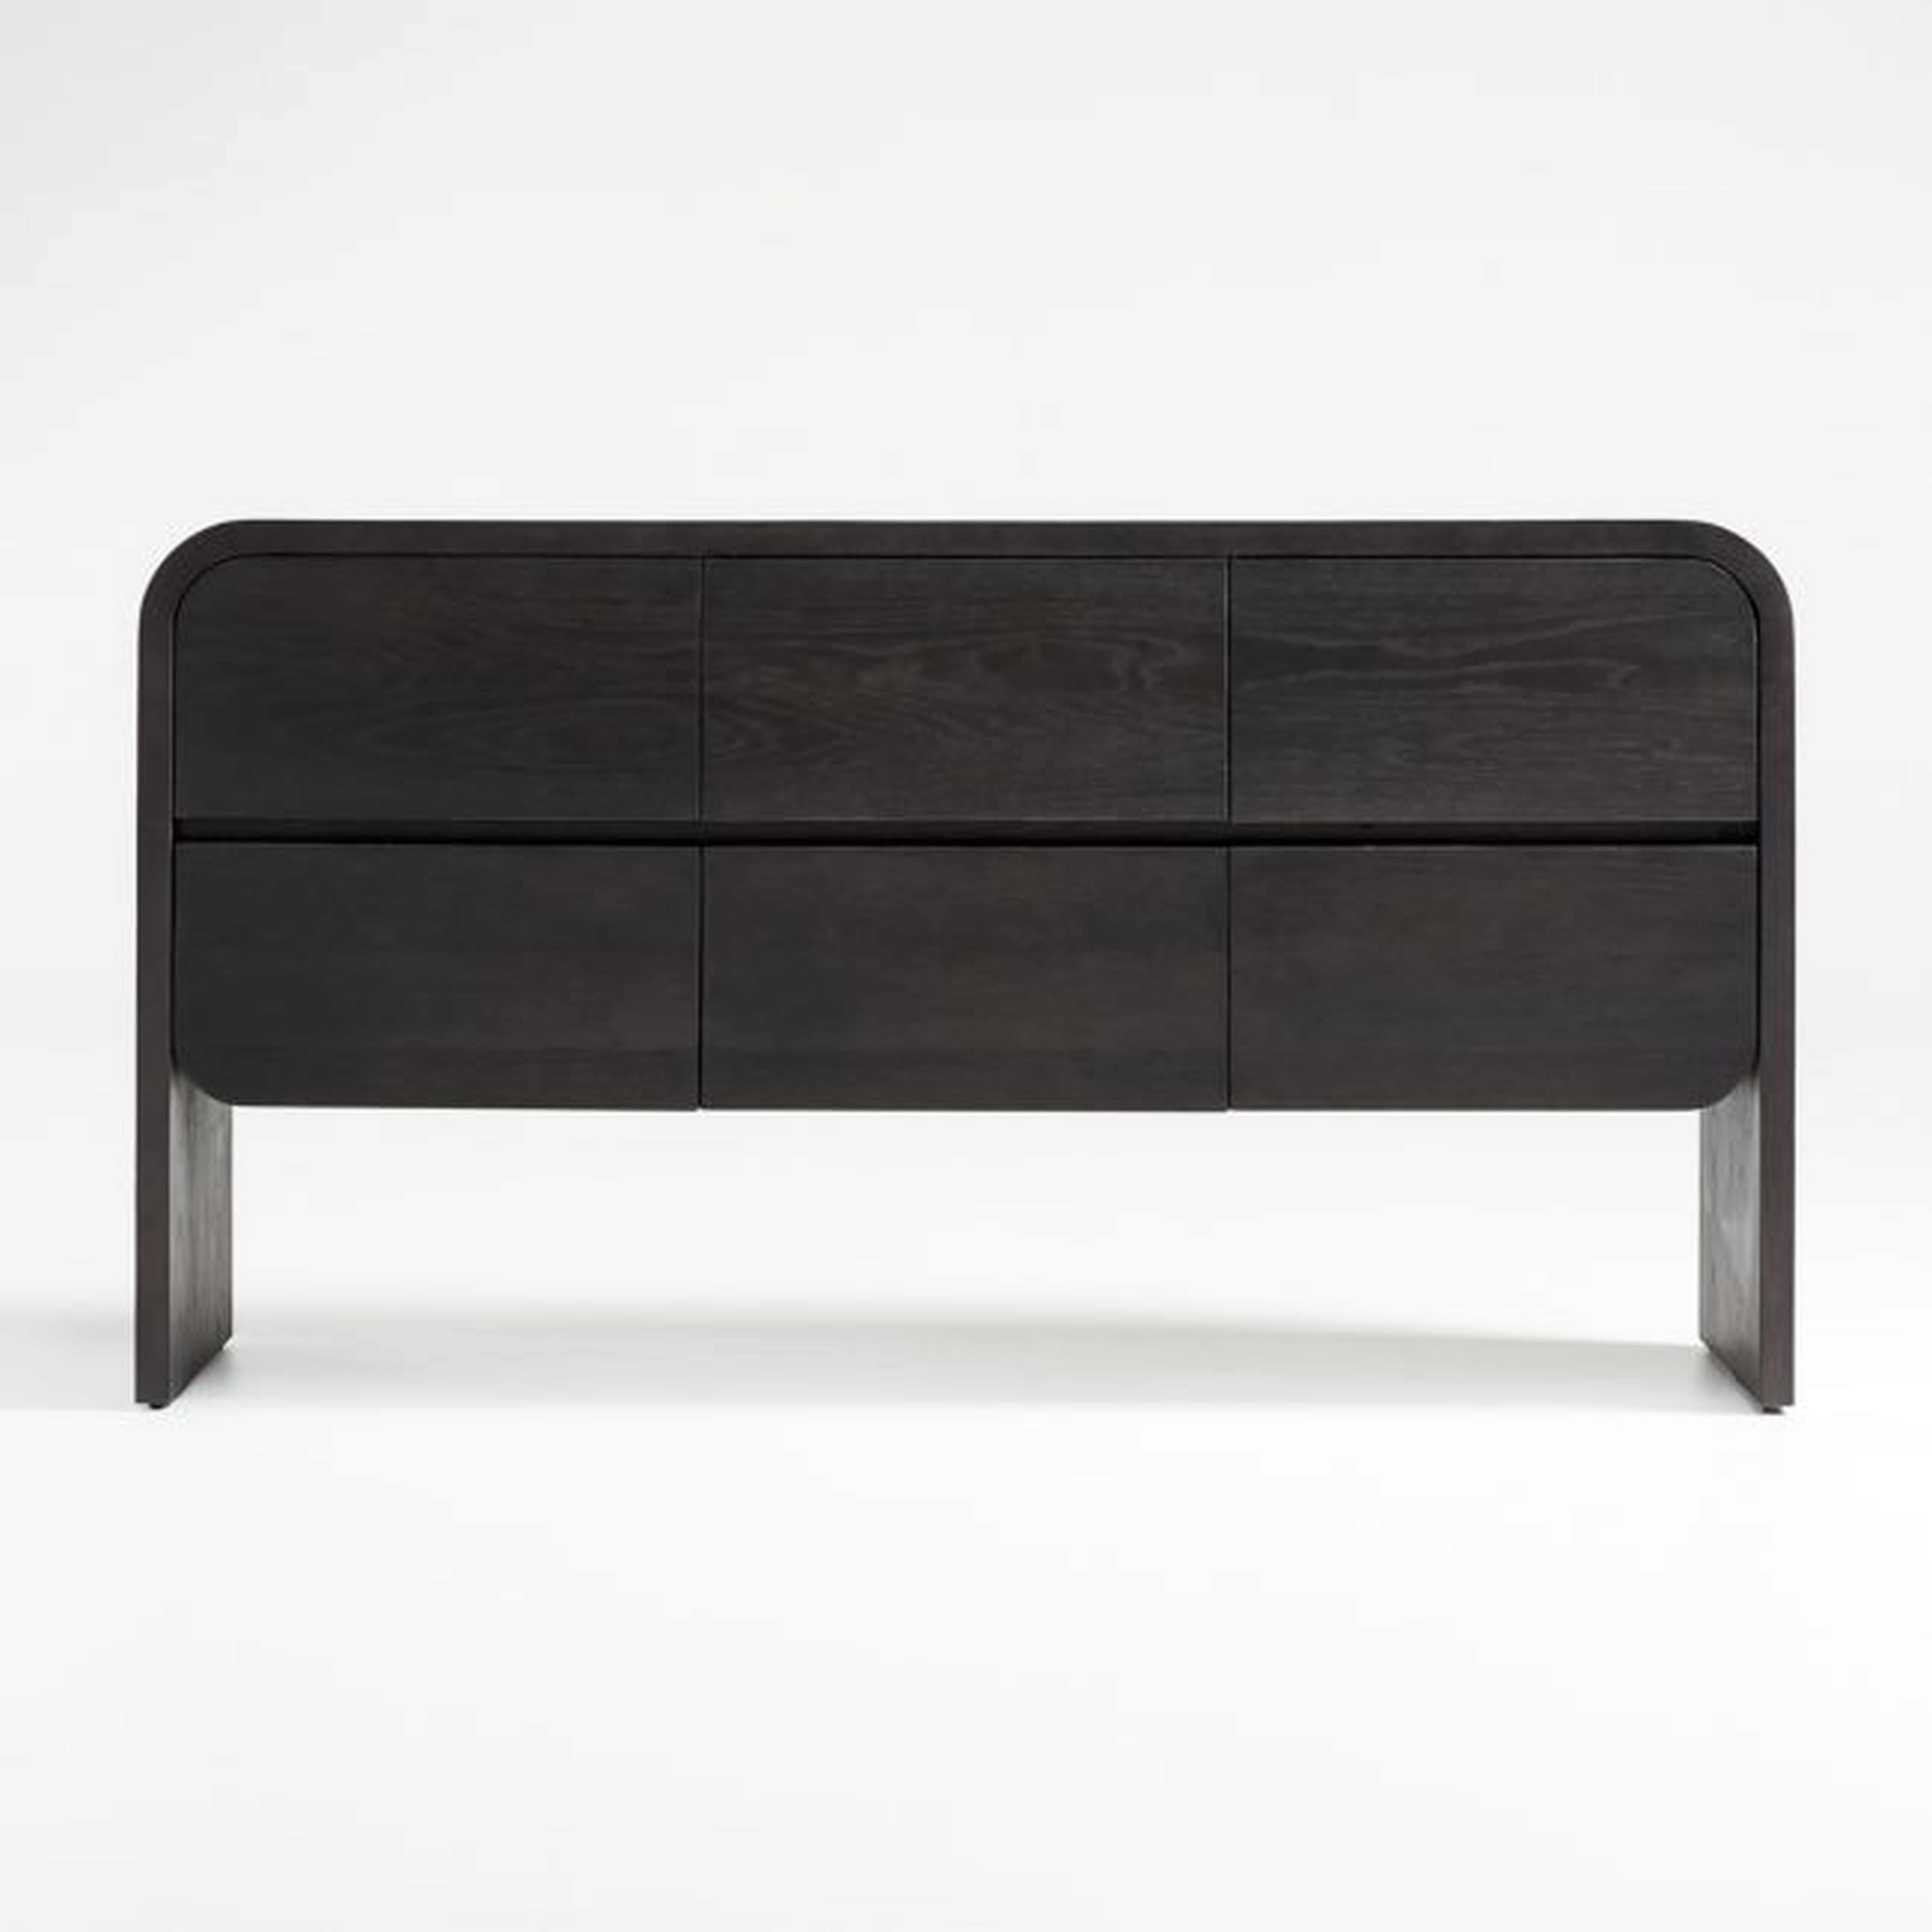 Cortez Charcoal Floating Dresser by Leanne Ford - Crate and Barrel